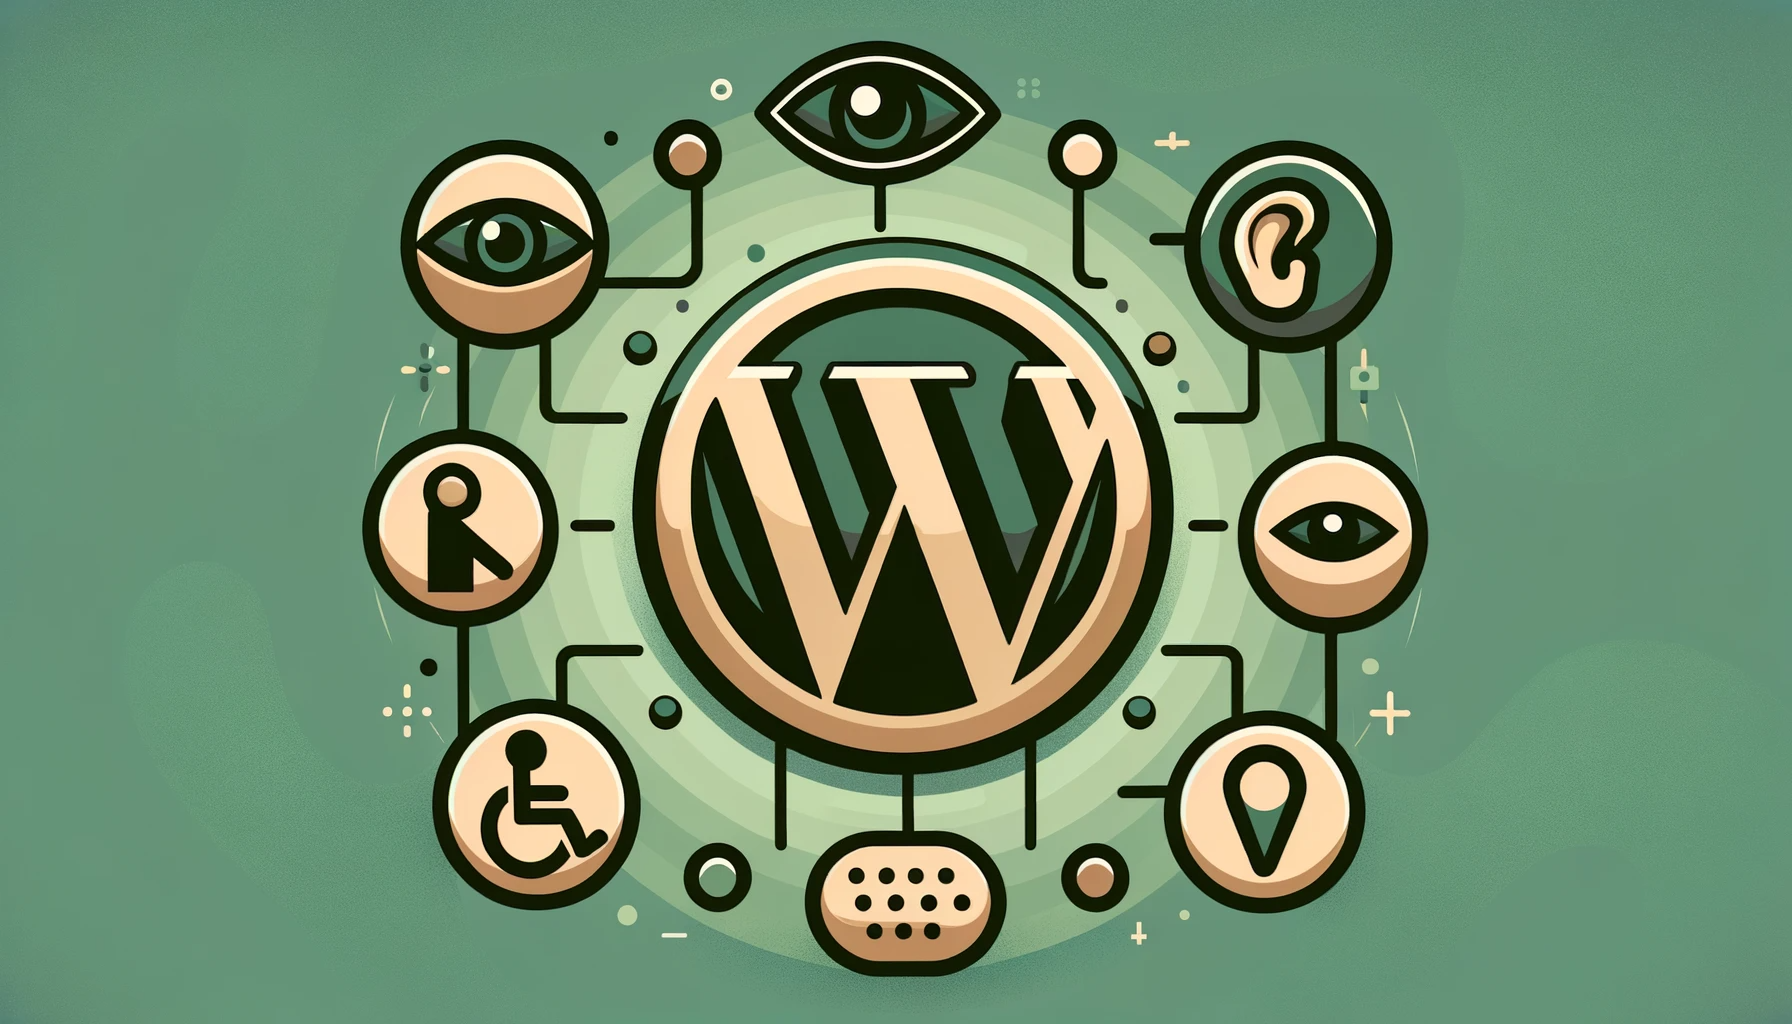 An illustration with the WordPress logo surrounded by various accessibility icons.